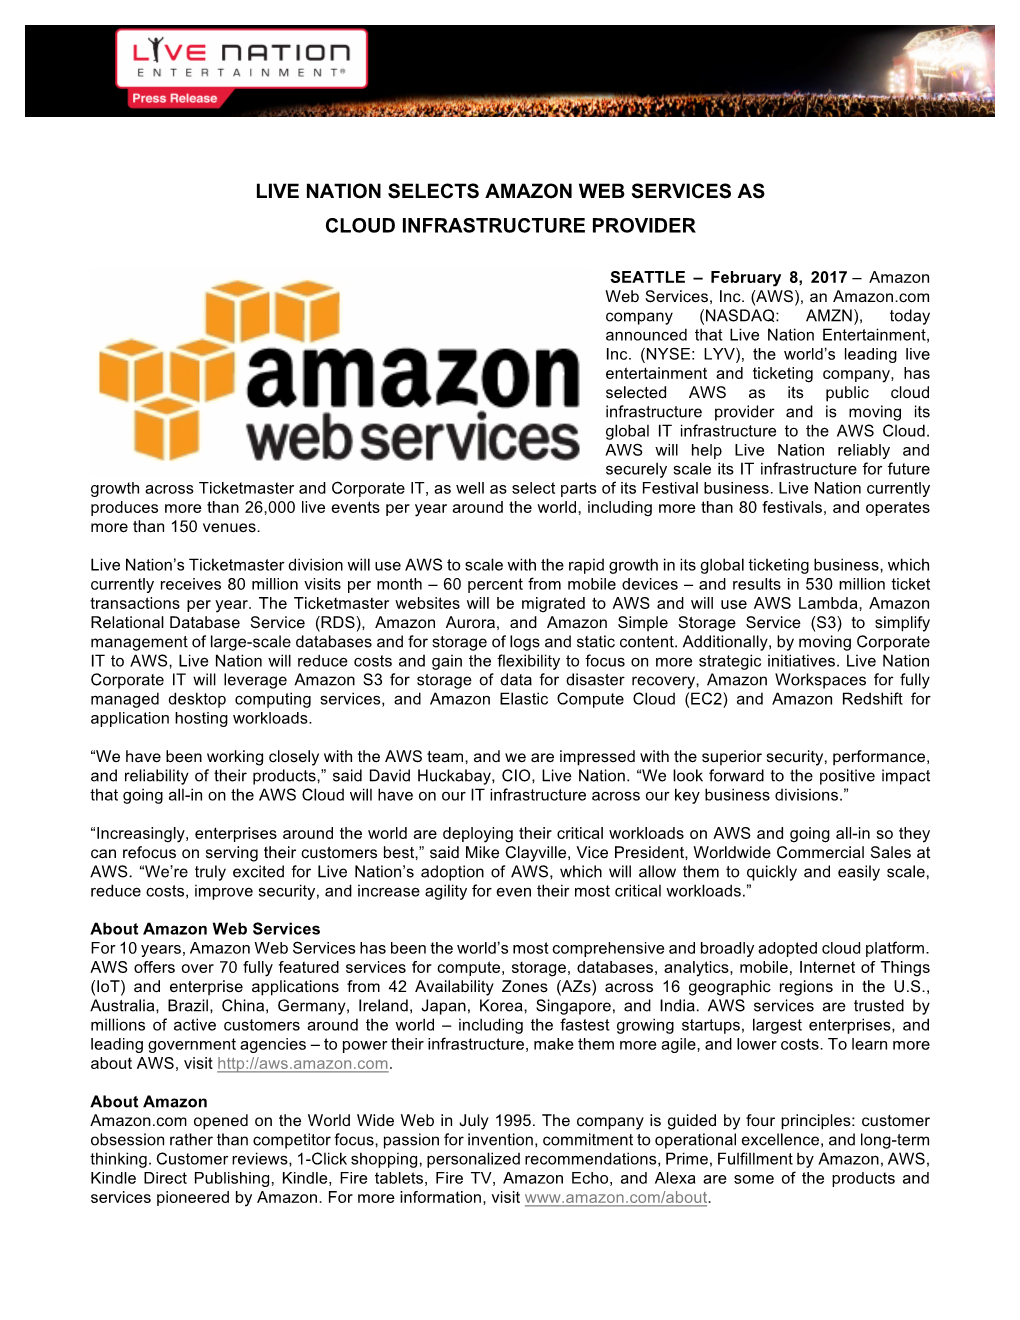 Live Nation Selects Amazon Web Services As Cloud Infrastructure Provider